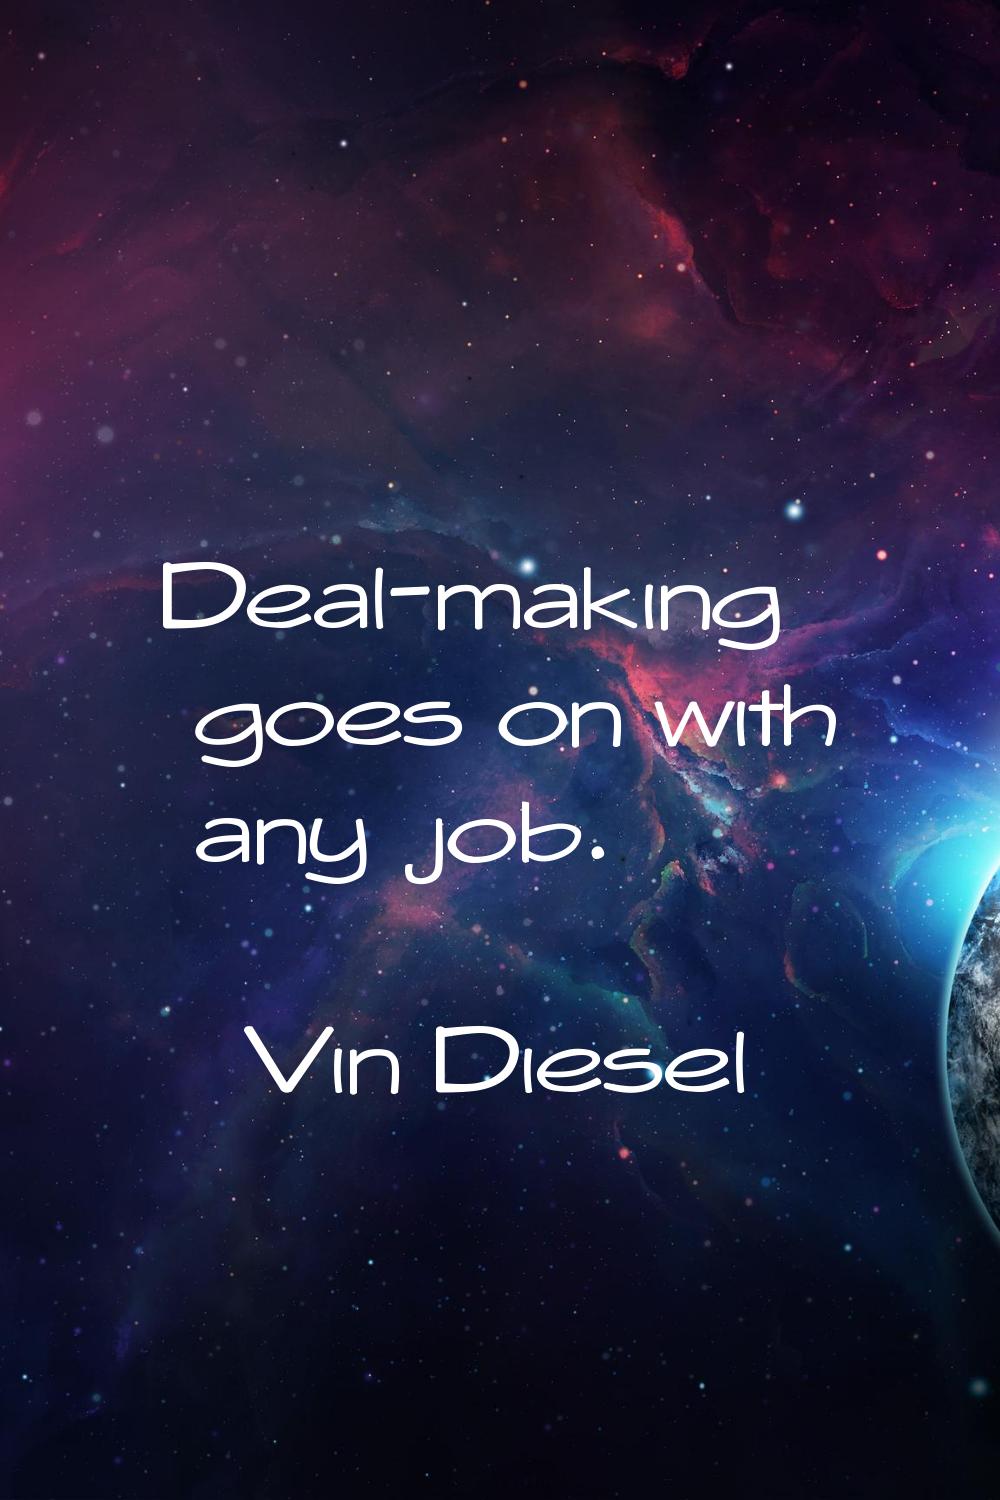 Deal-making goes on with any job.